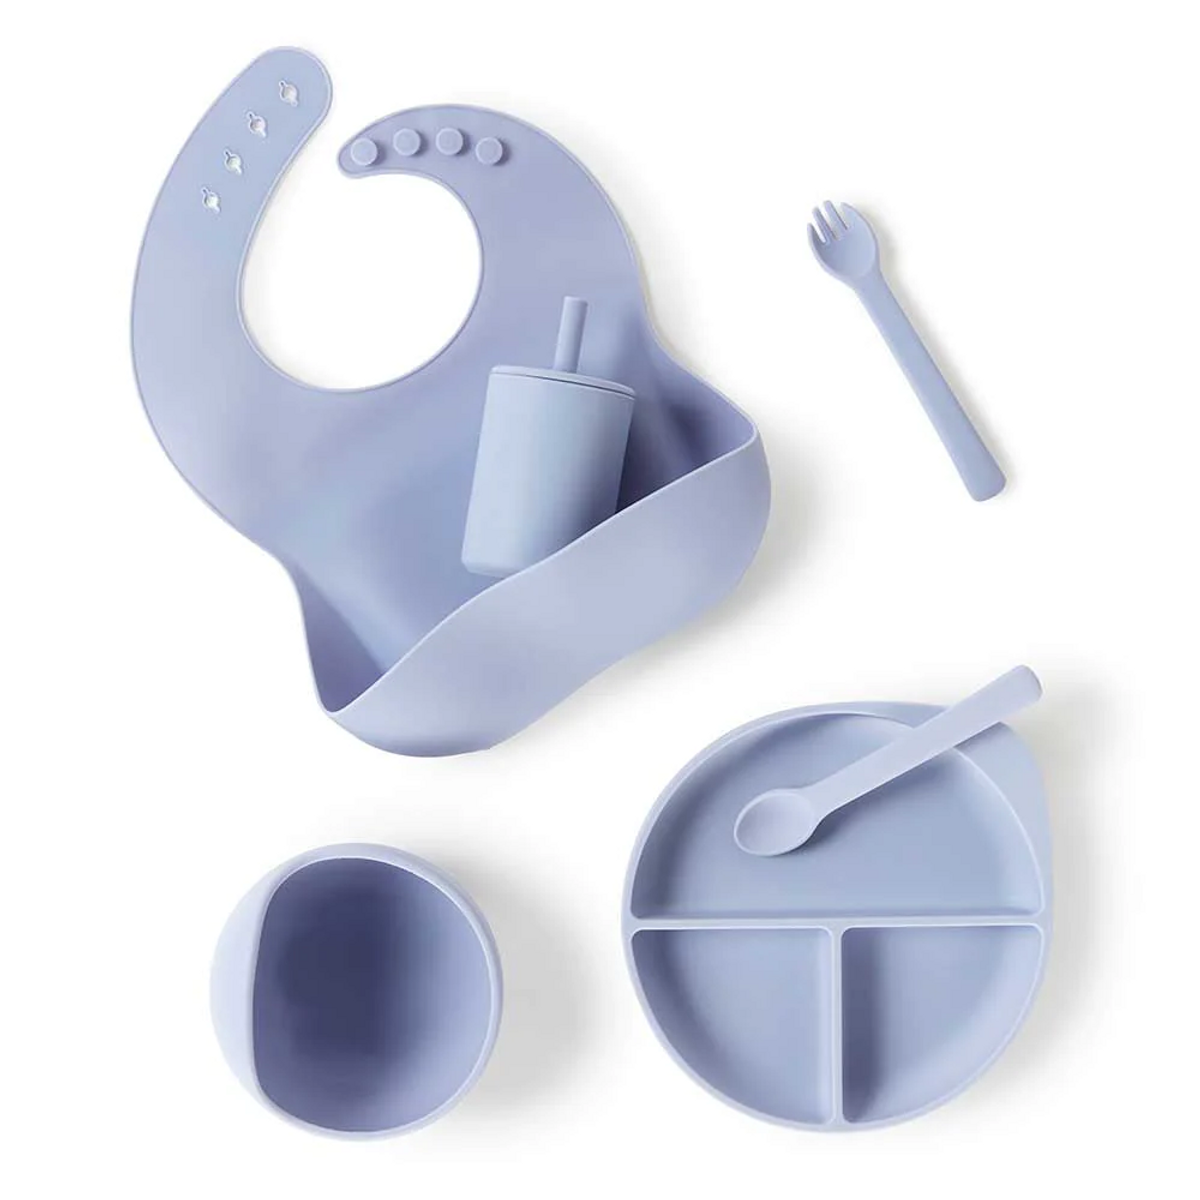 SNUGGLE HUNNY KIDS SILICONE MEAL KIT - ZEN